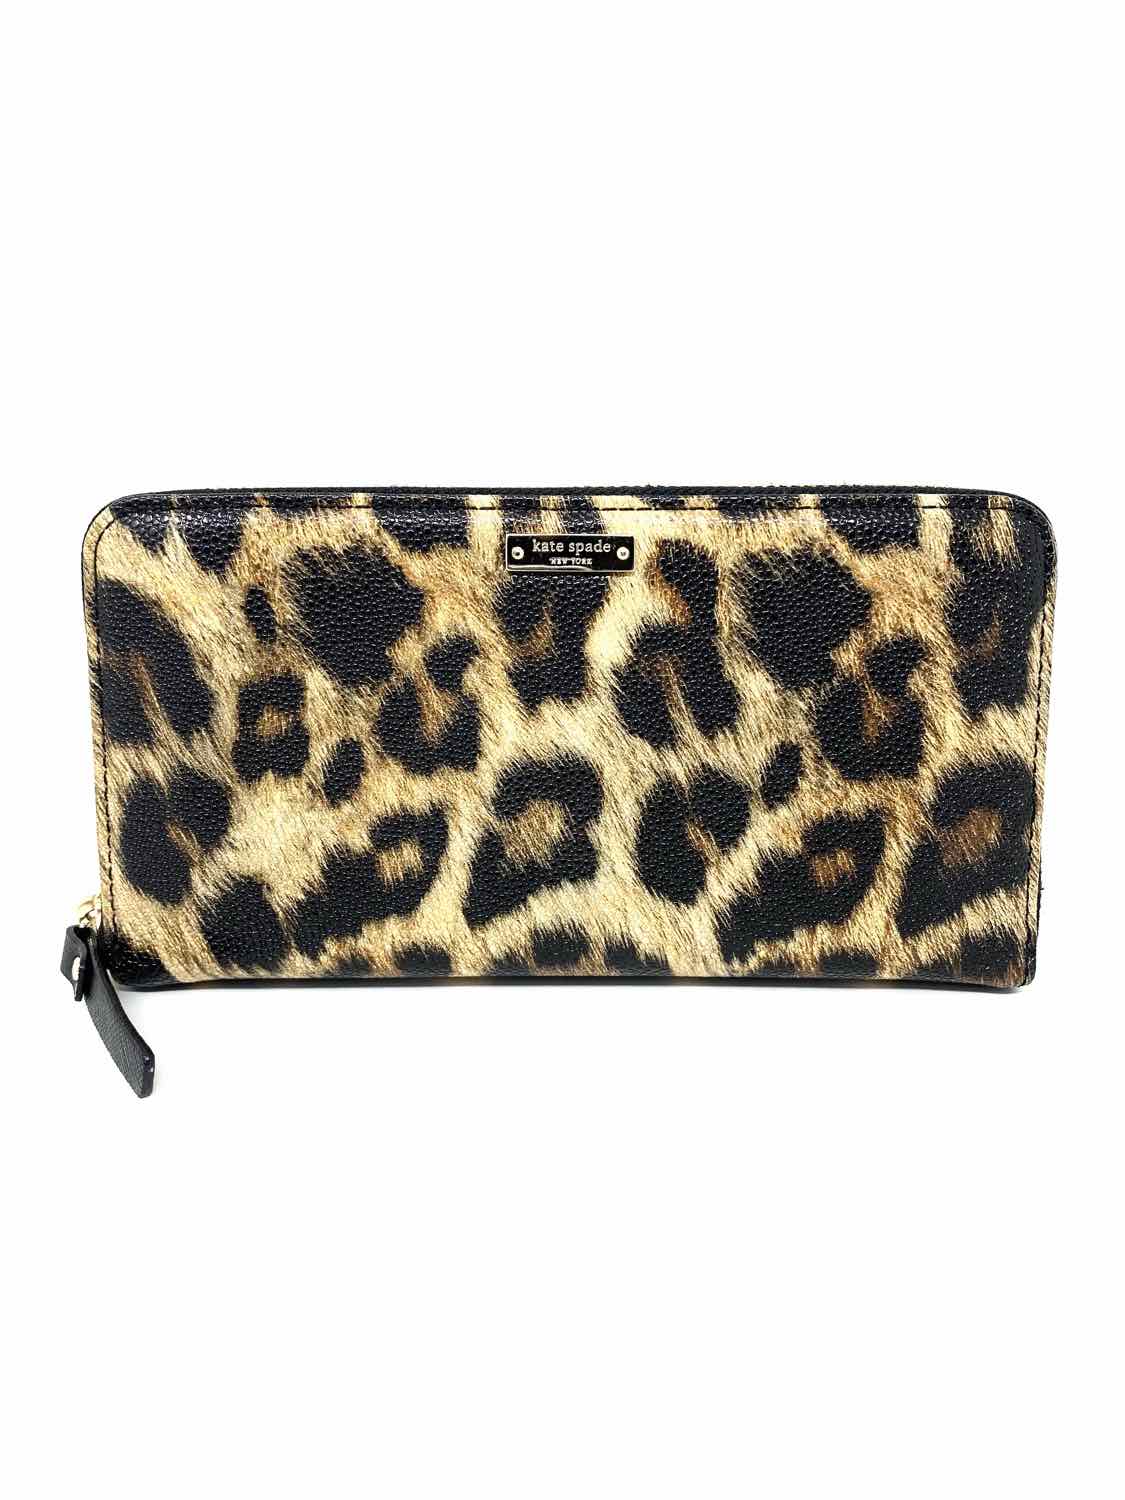 Lucy 3d Leopard Coin Purse | Kate Spade New York